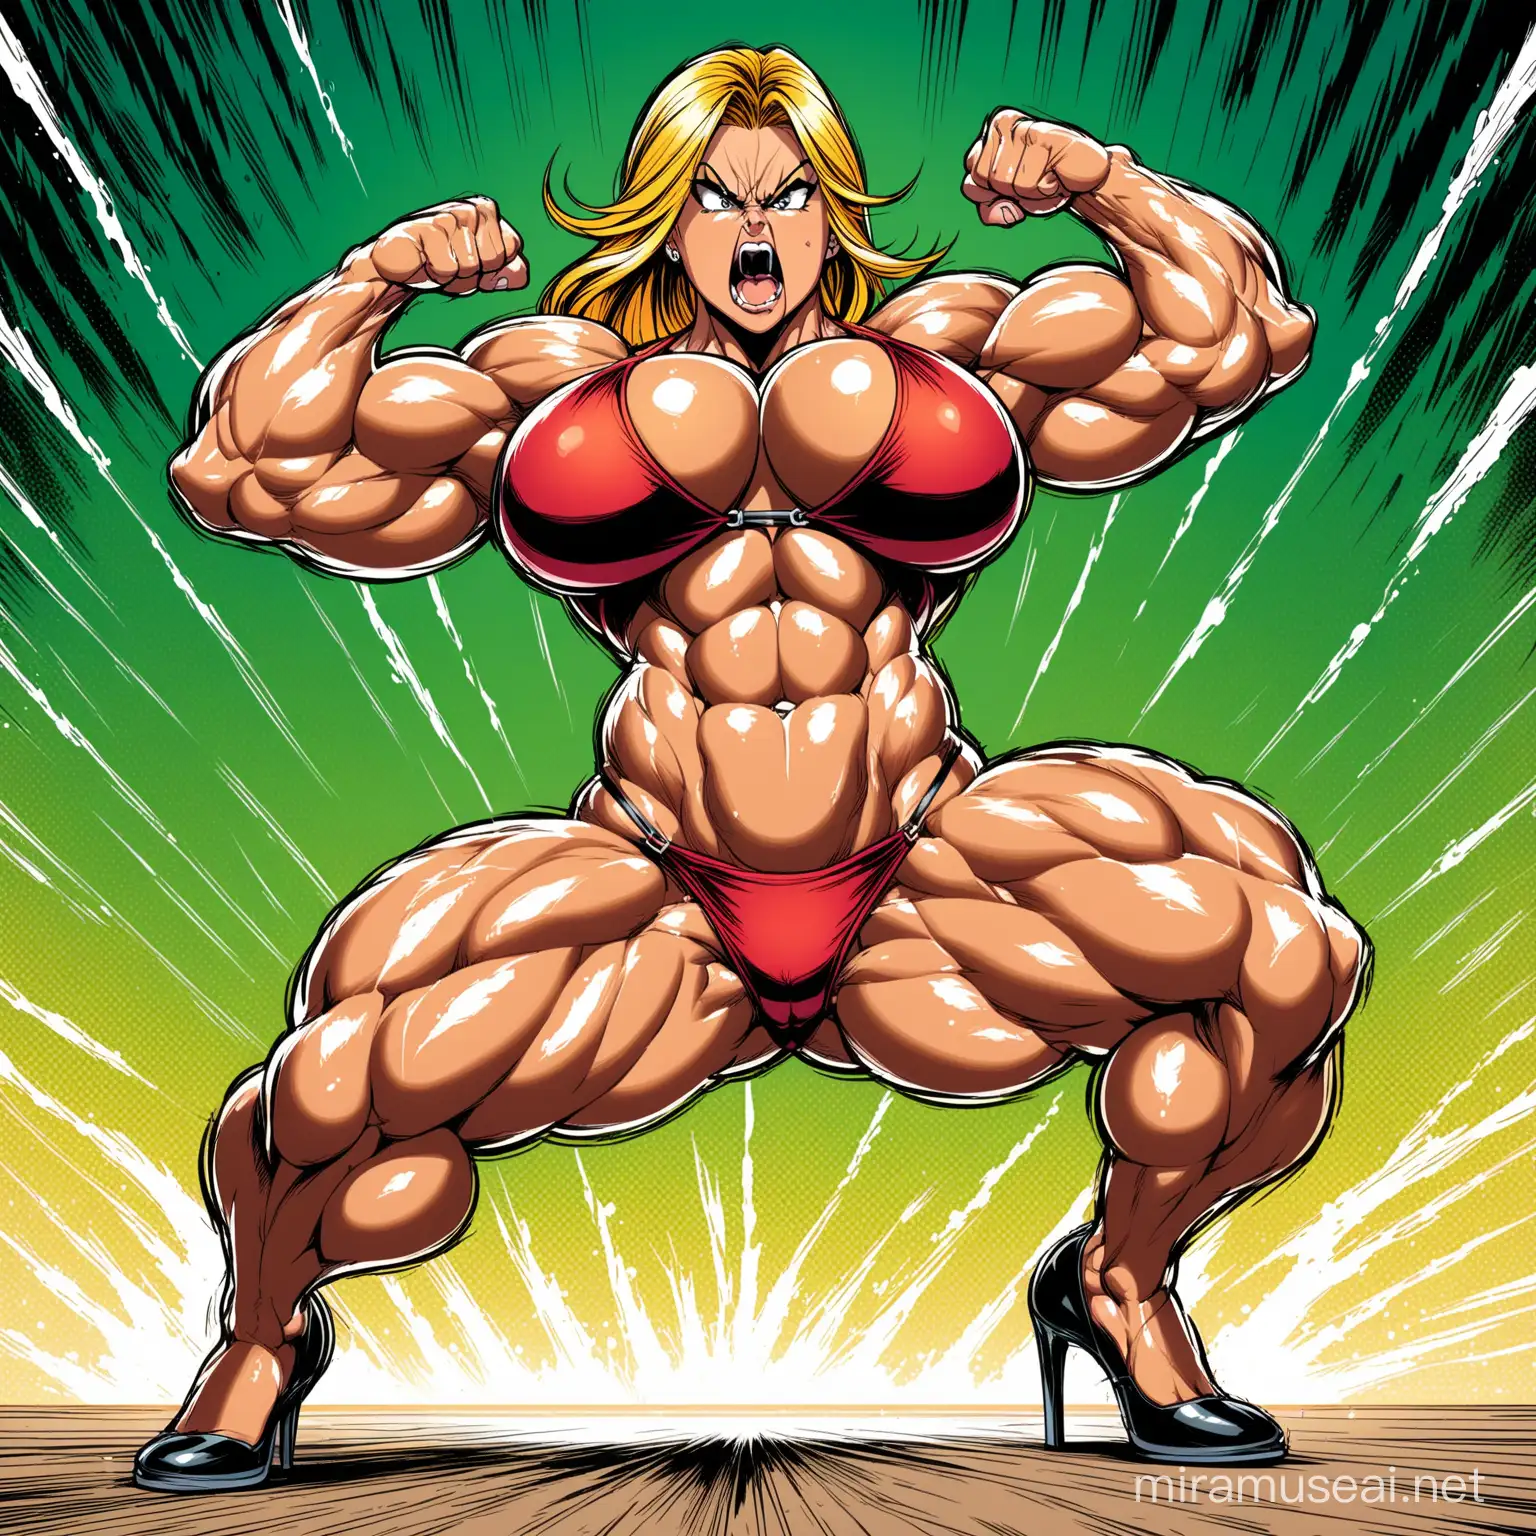 Comic Style Angry Female Bodybuilder on Stage in VeinPopping Bikini